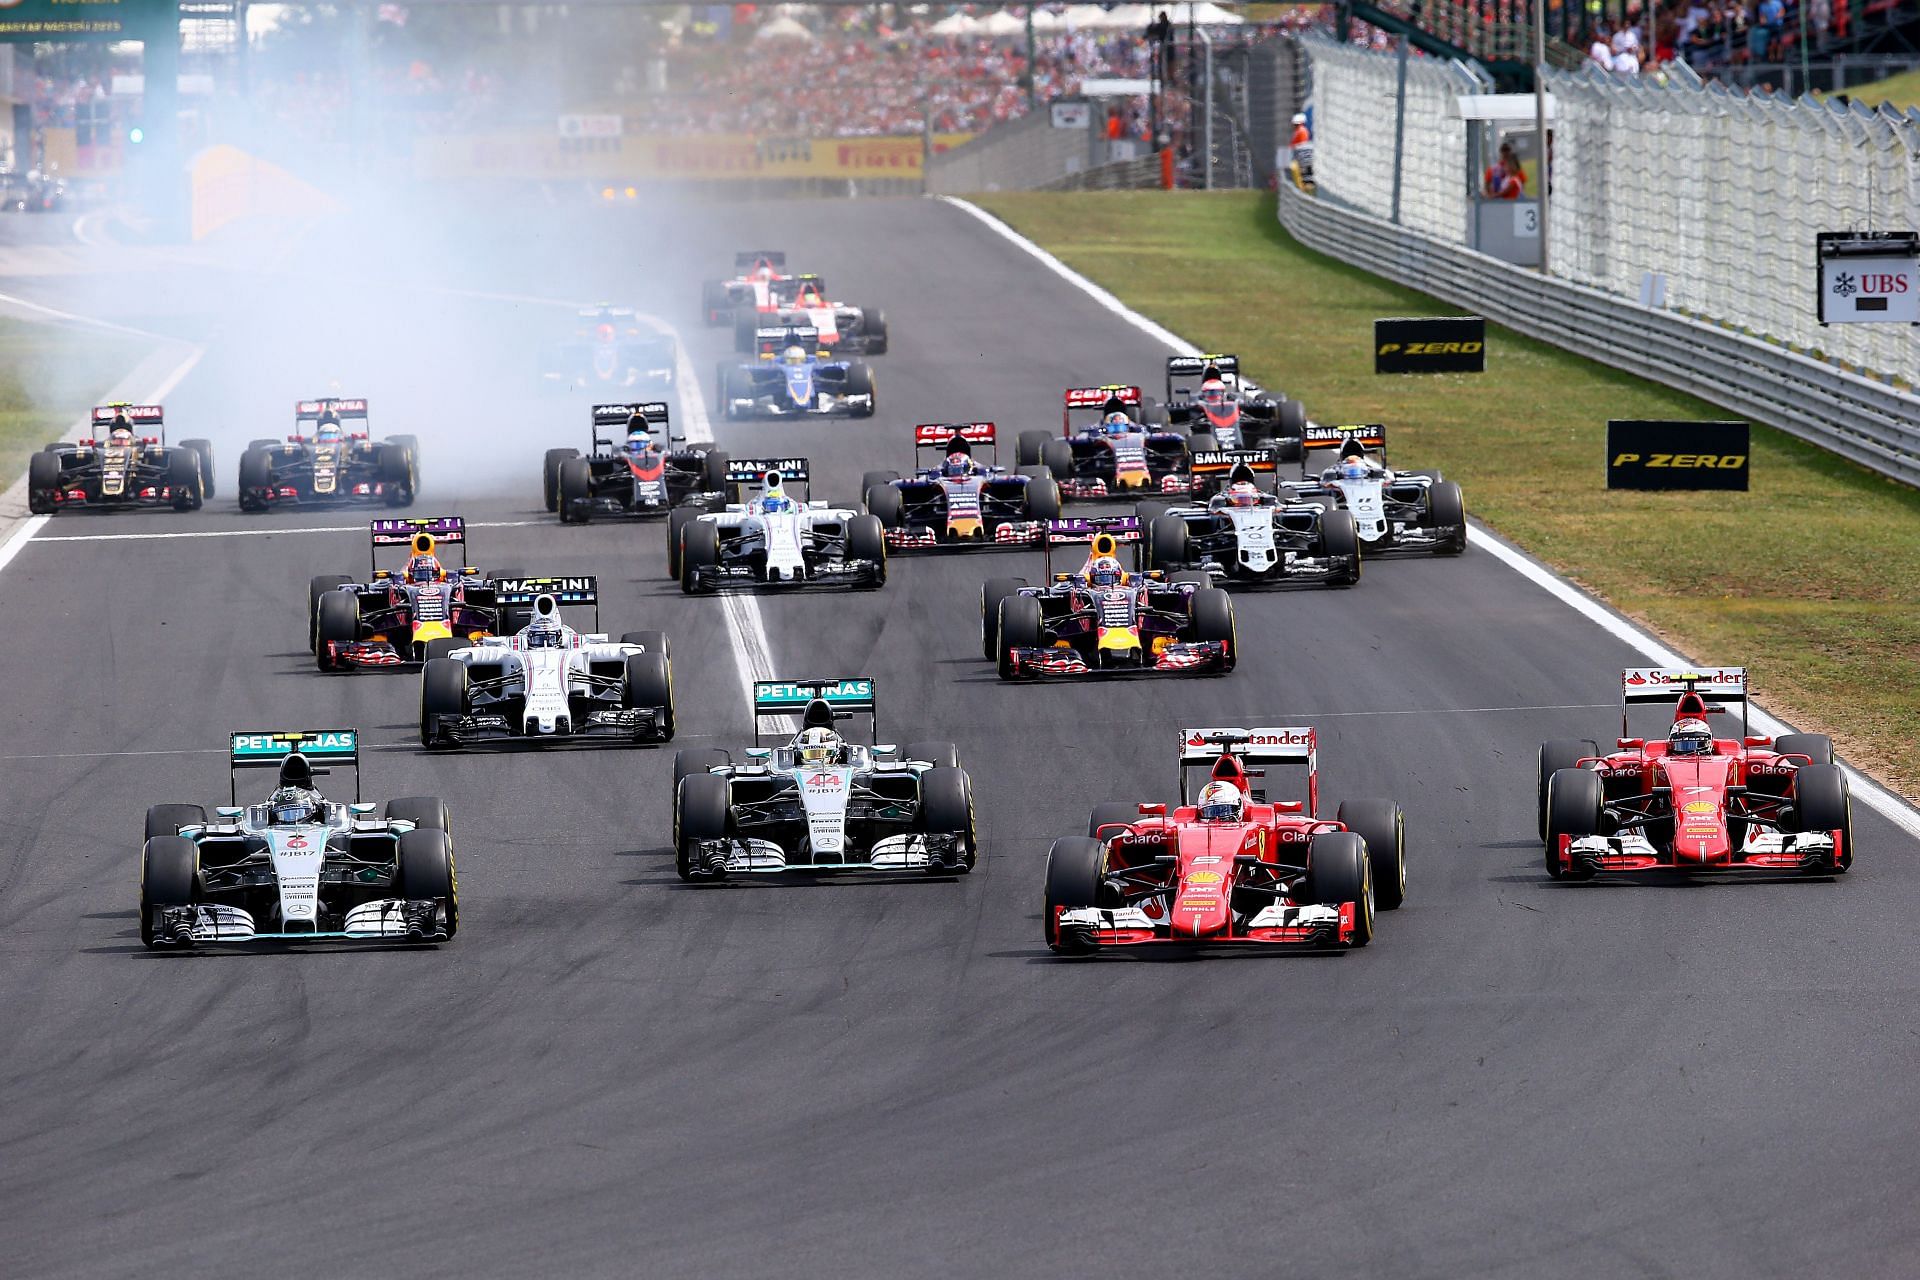 2023 F1 Hungarian GP upgrades Who has brought what?